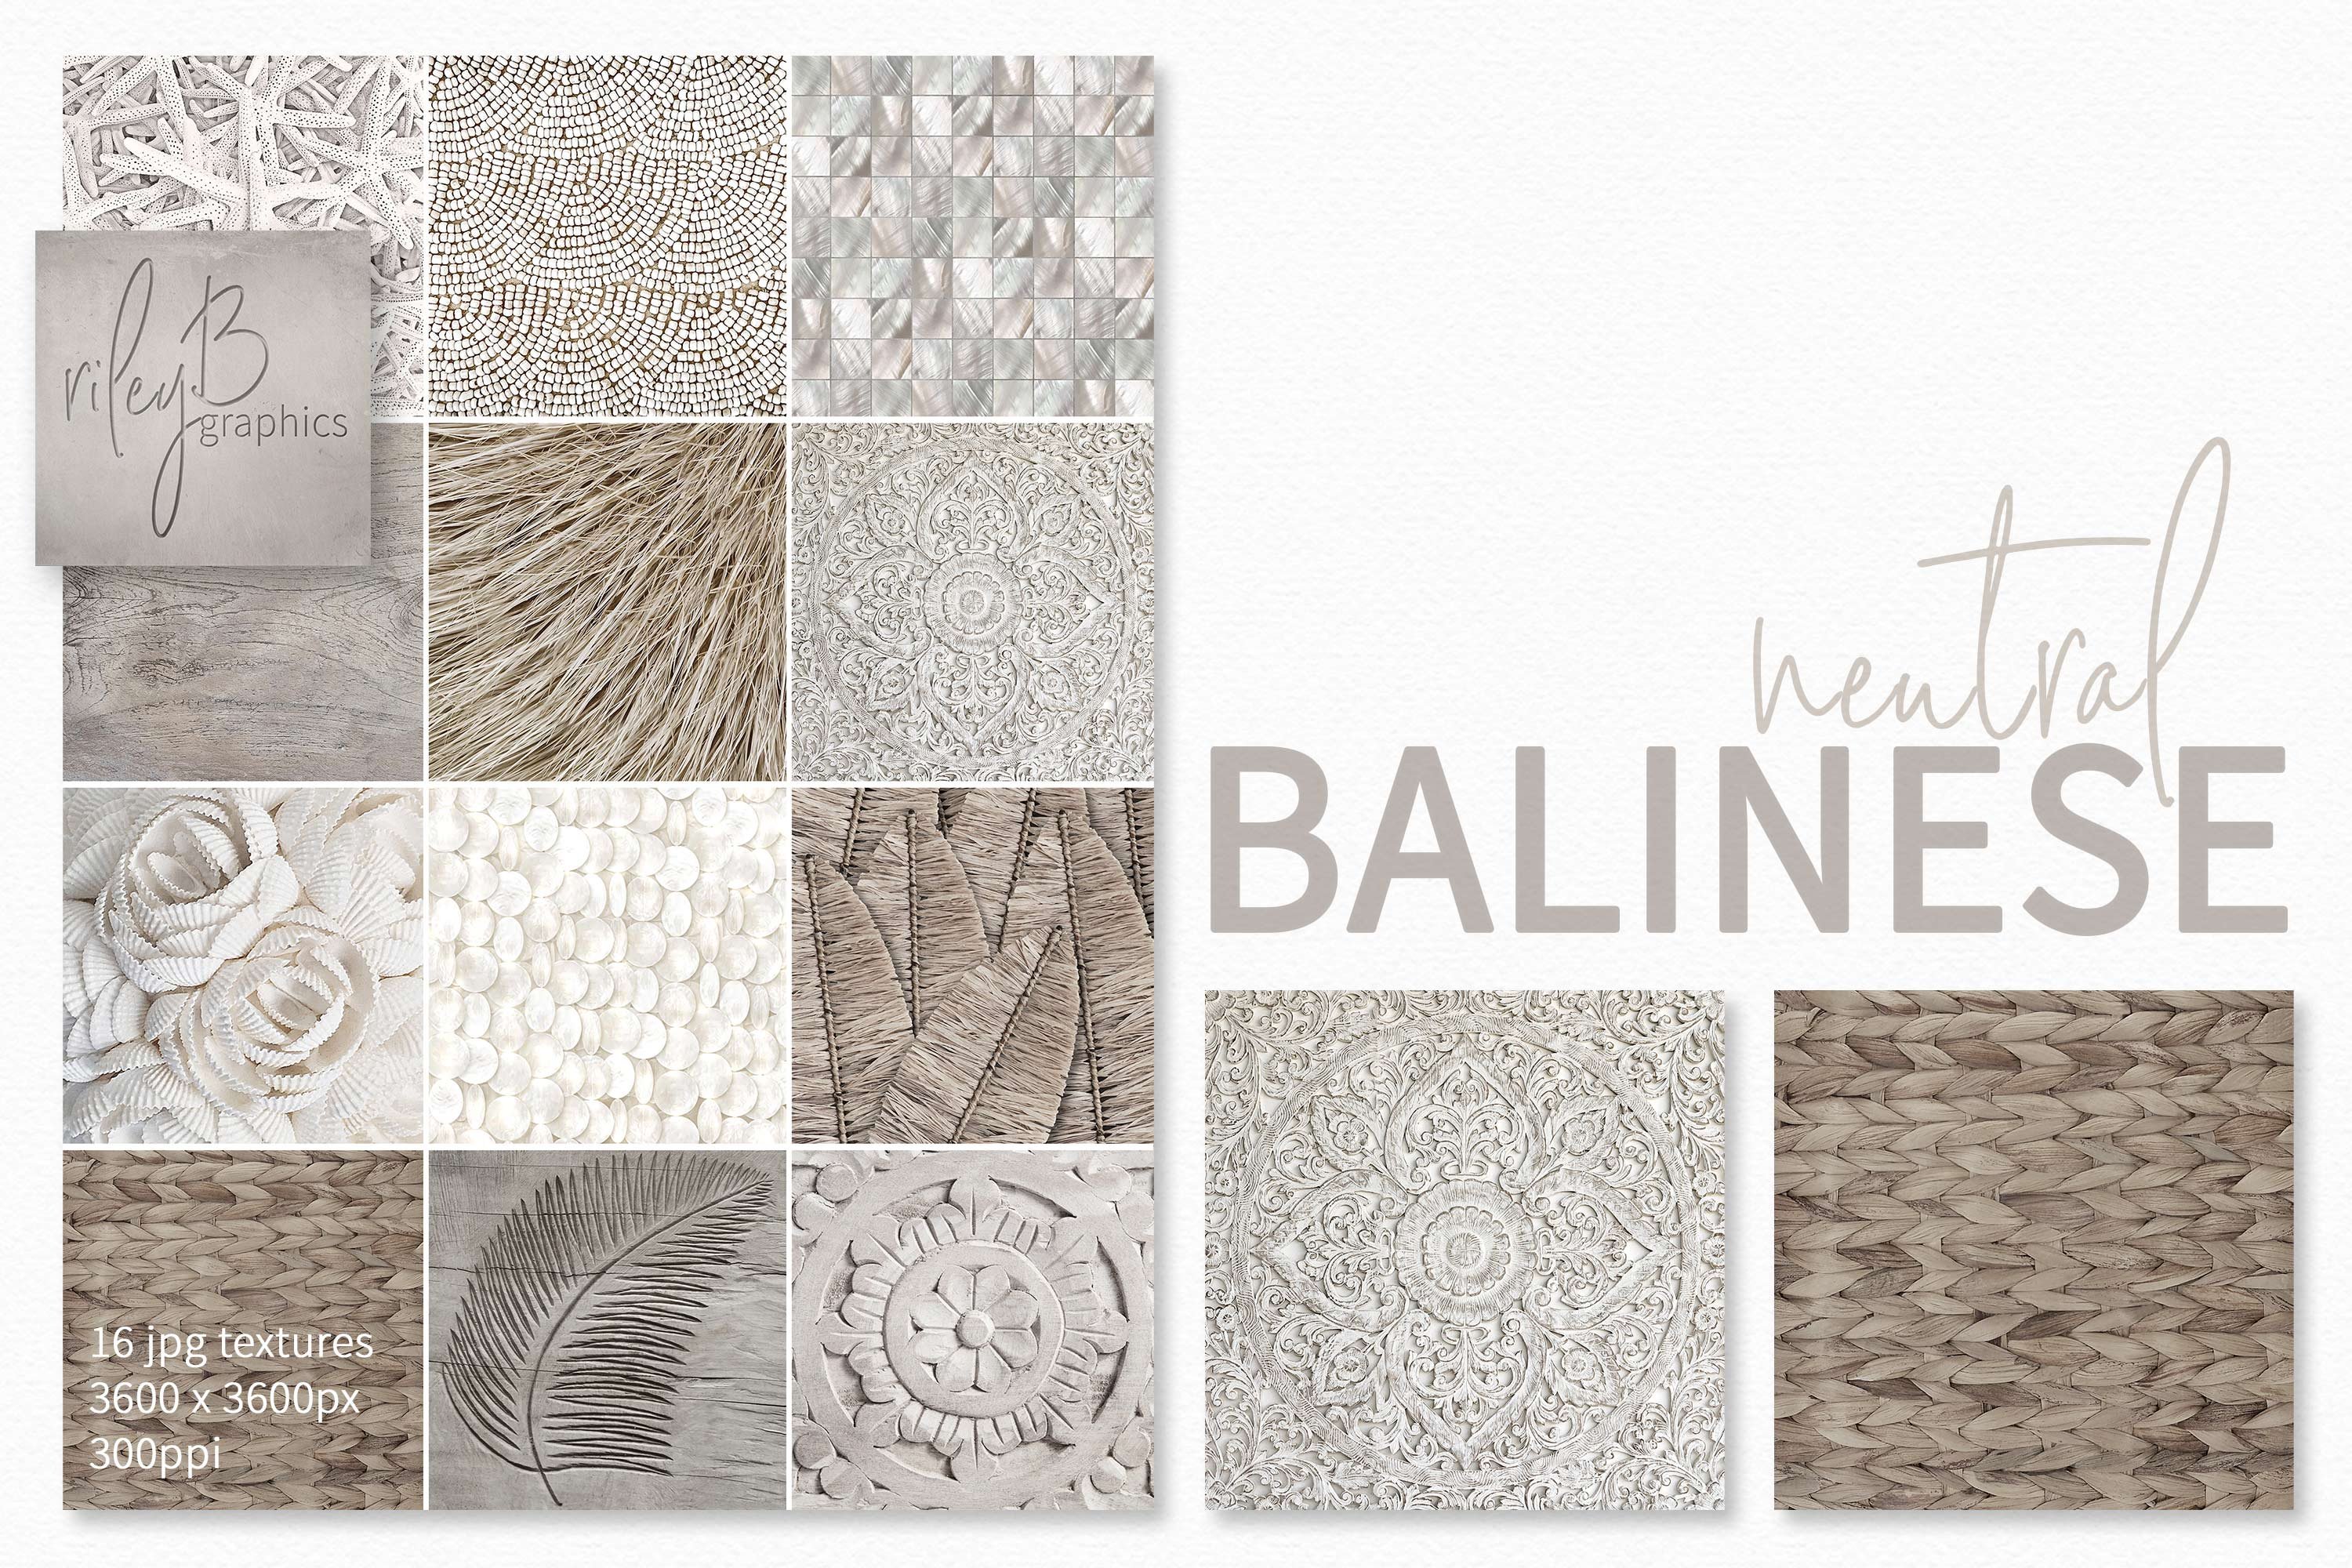 Neutral Balinese Textures cover image.